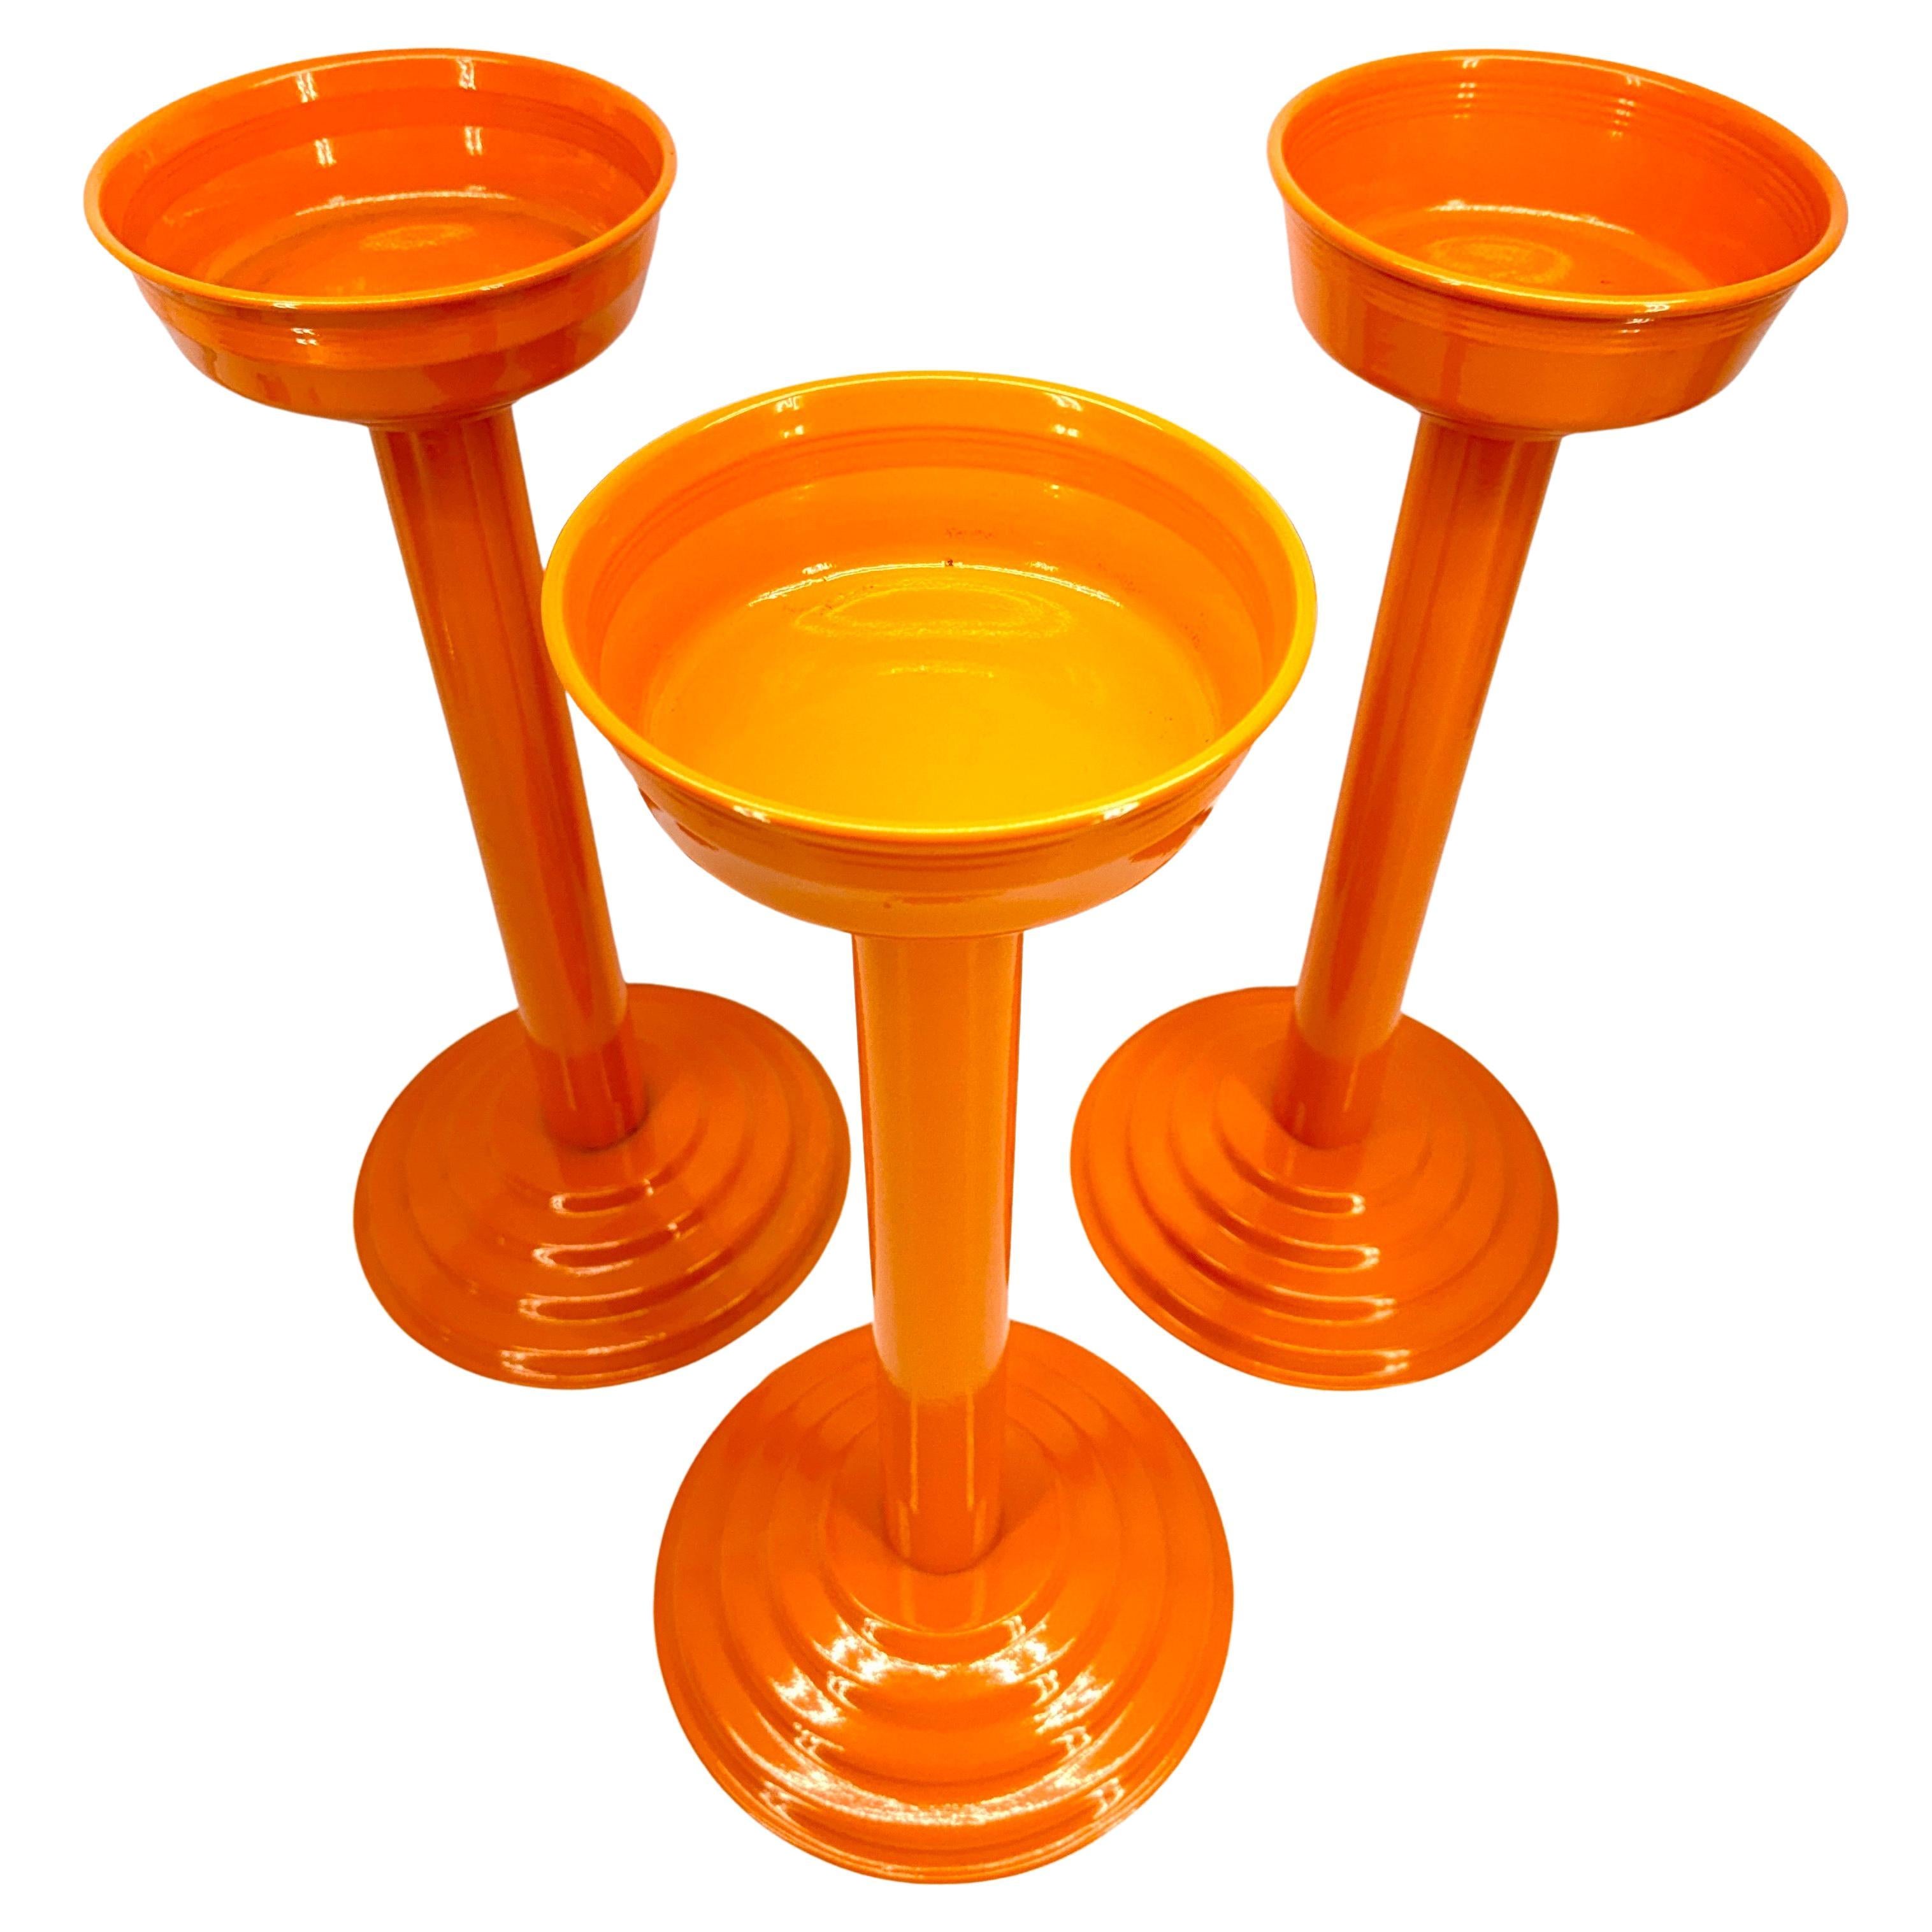 Orange Colored Champagne Wine Bucket Stand, France

Freshly powder-coated in what we call Hermes Orange. Festive barware piece to be used at a dining table for dinner parties or as display holding your favorite champagne or wine bottle. Certainly a